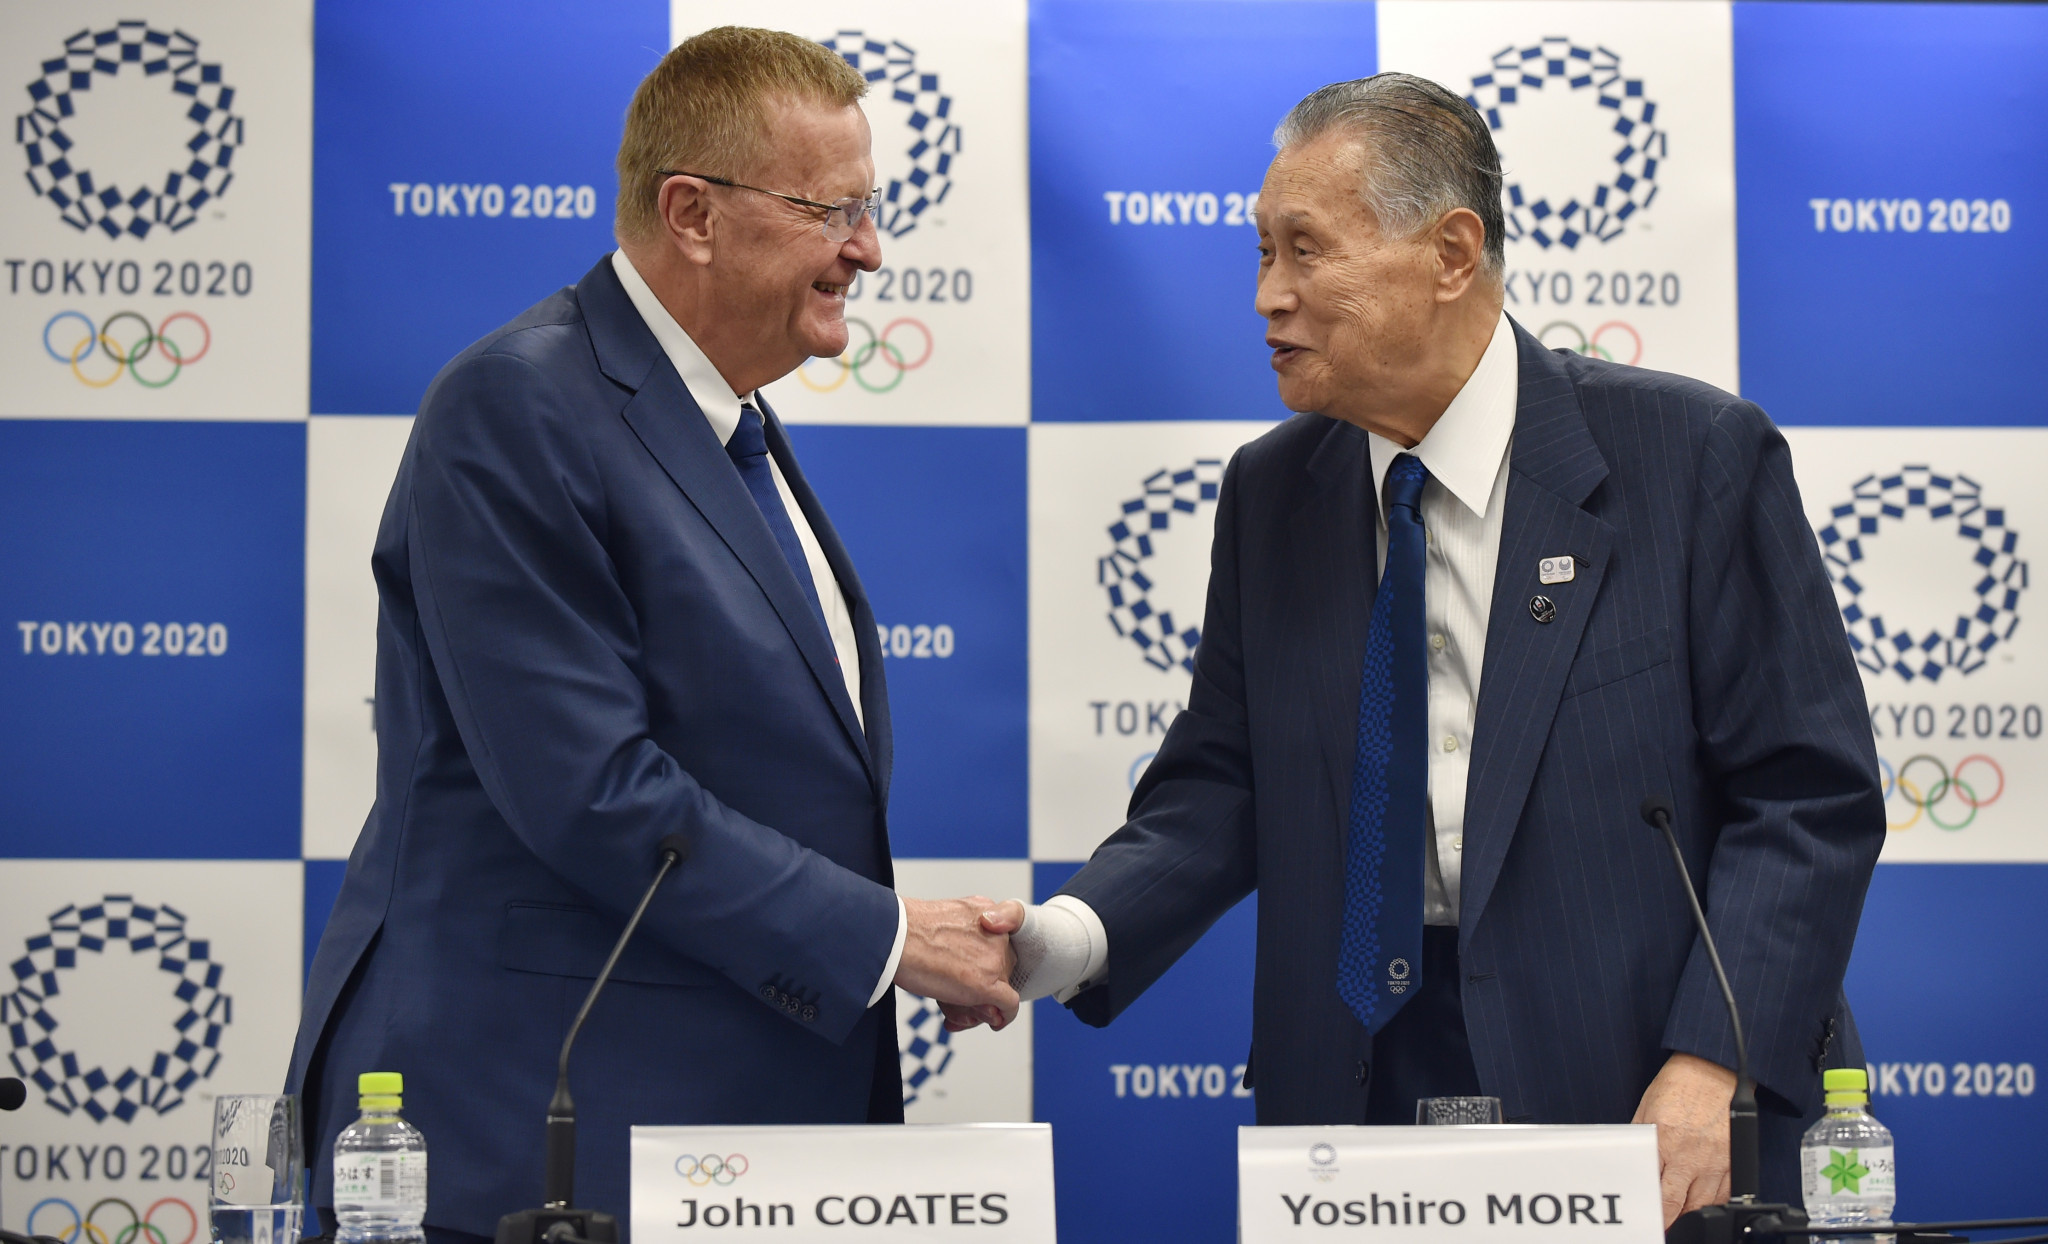 IOC Coordination Commission chairman John Coates was full of praise for Tokyo 2020 ©Getty Images